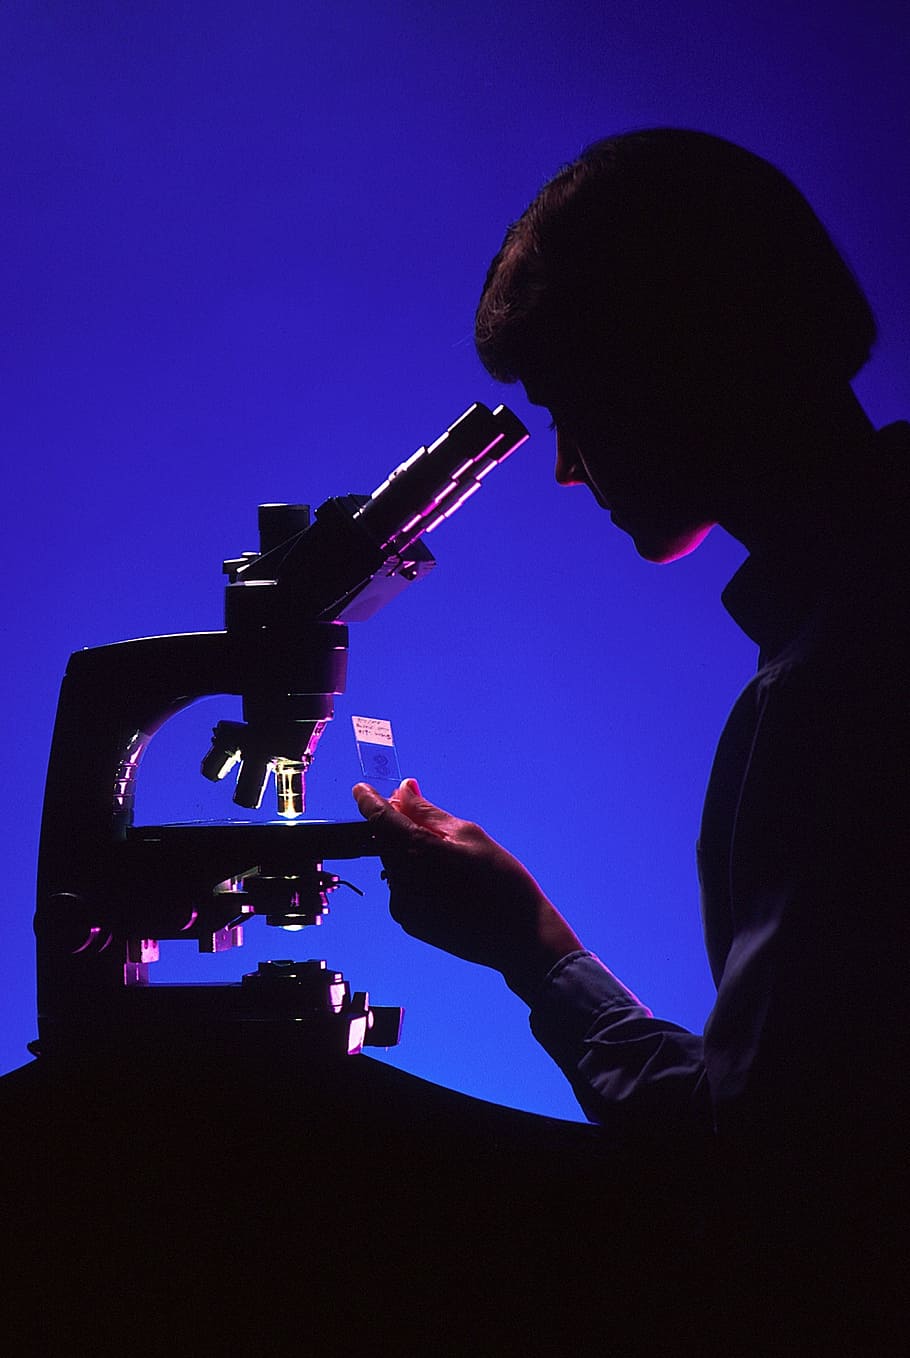 person using microscope, scientist with microscope, silhouettes, laboratory, science, biology, lab, medical, slide, examination